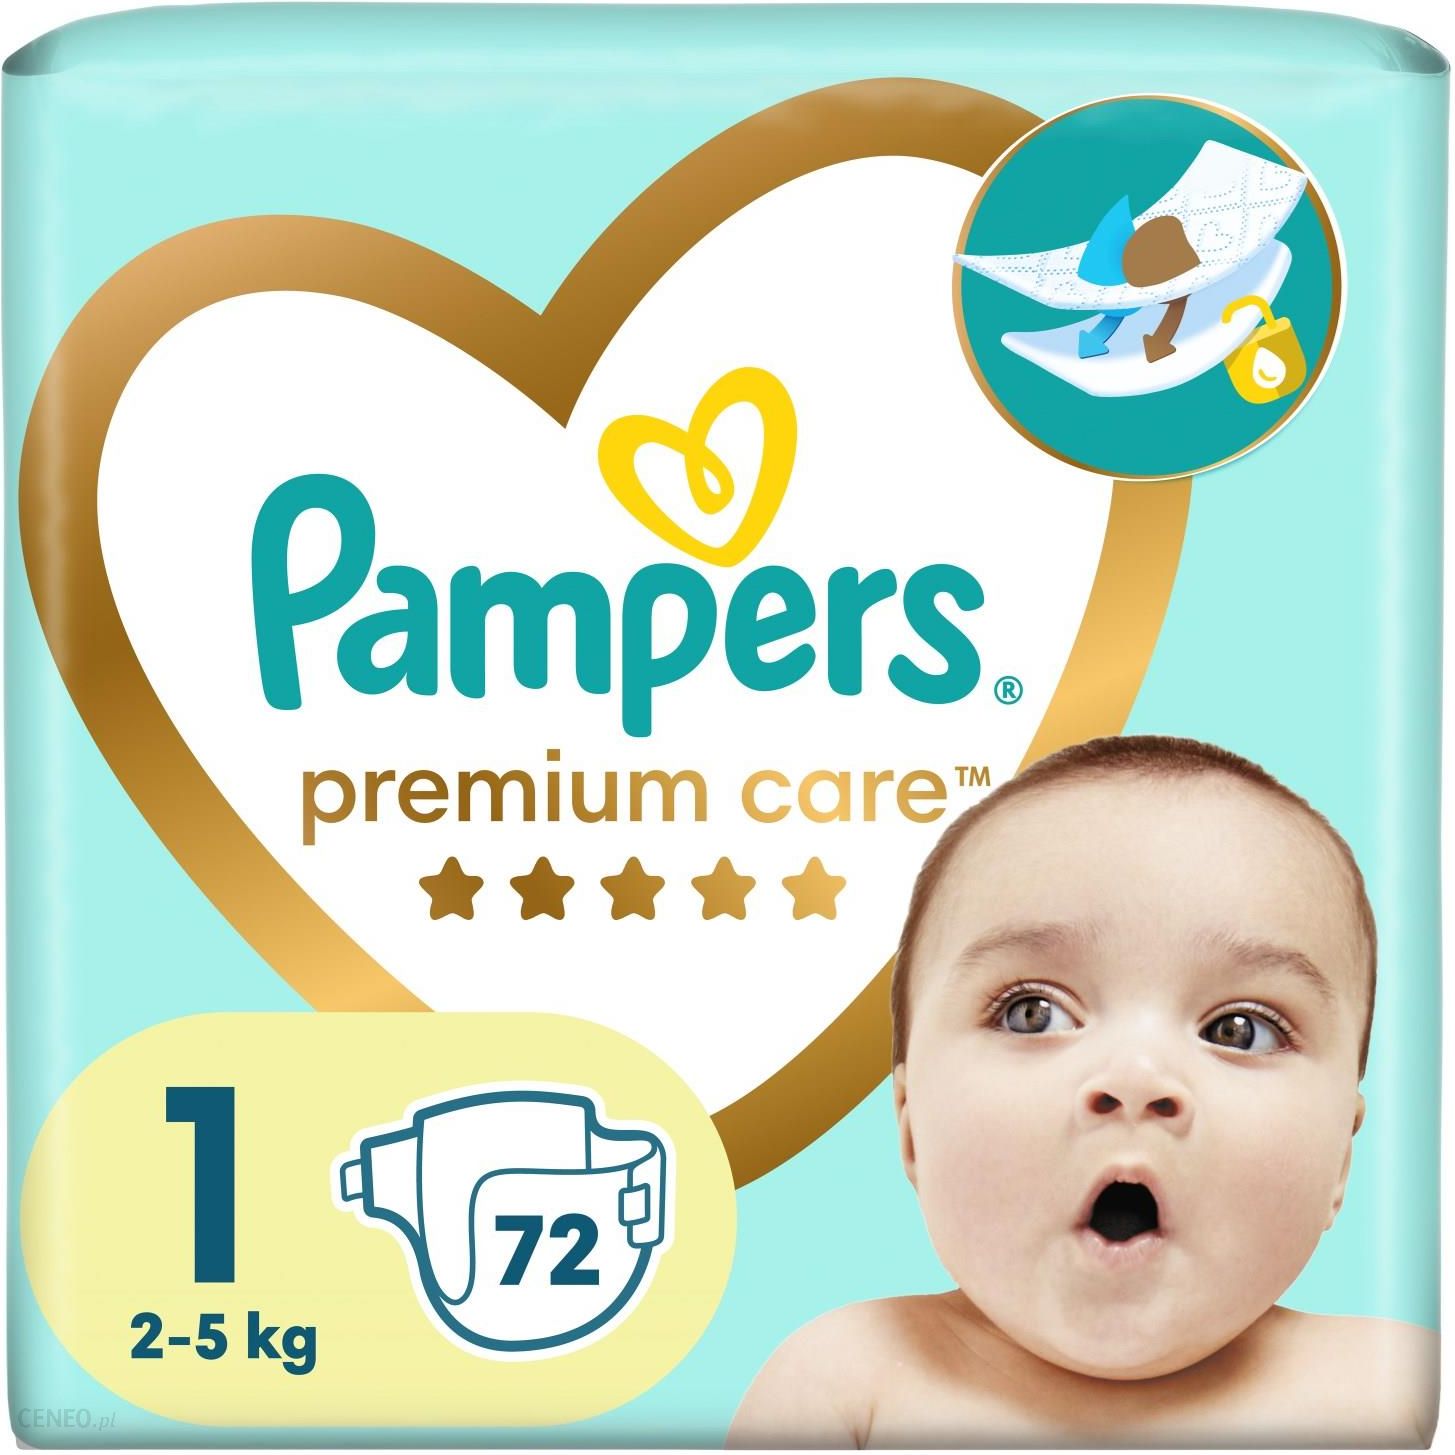 pampers 3 promo baby